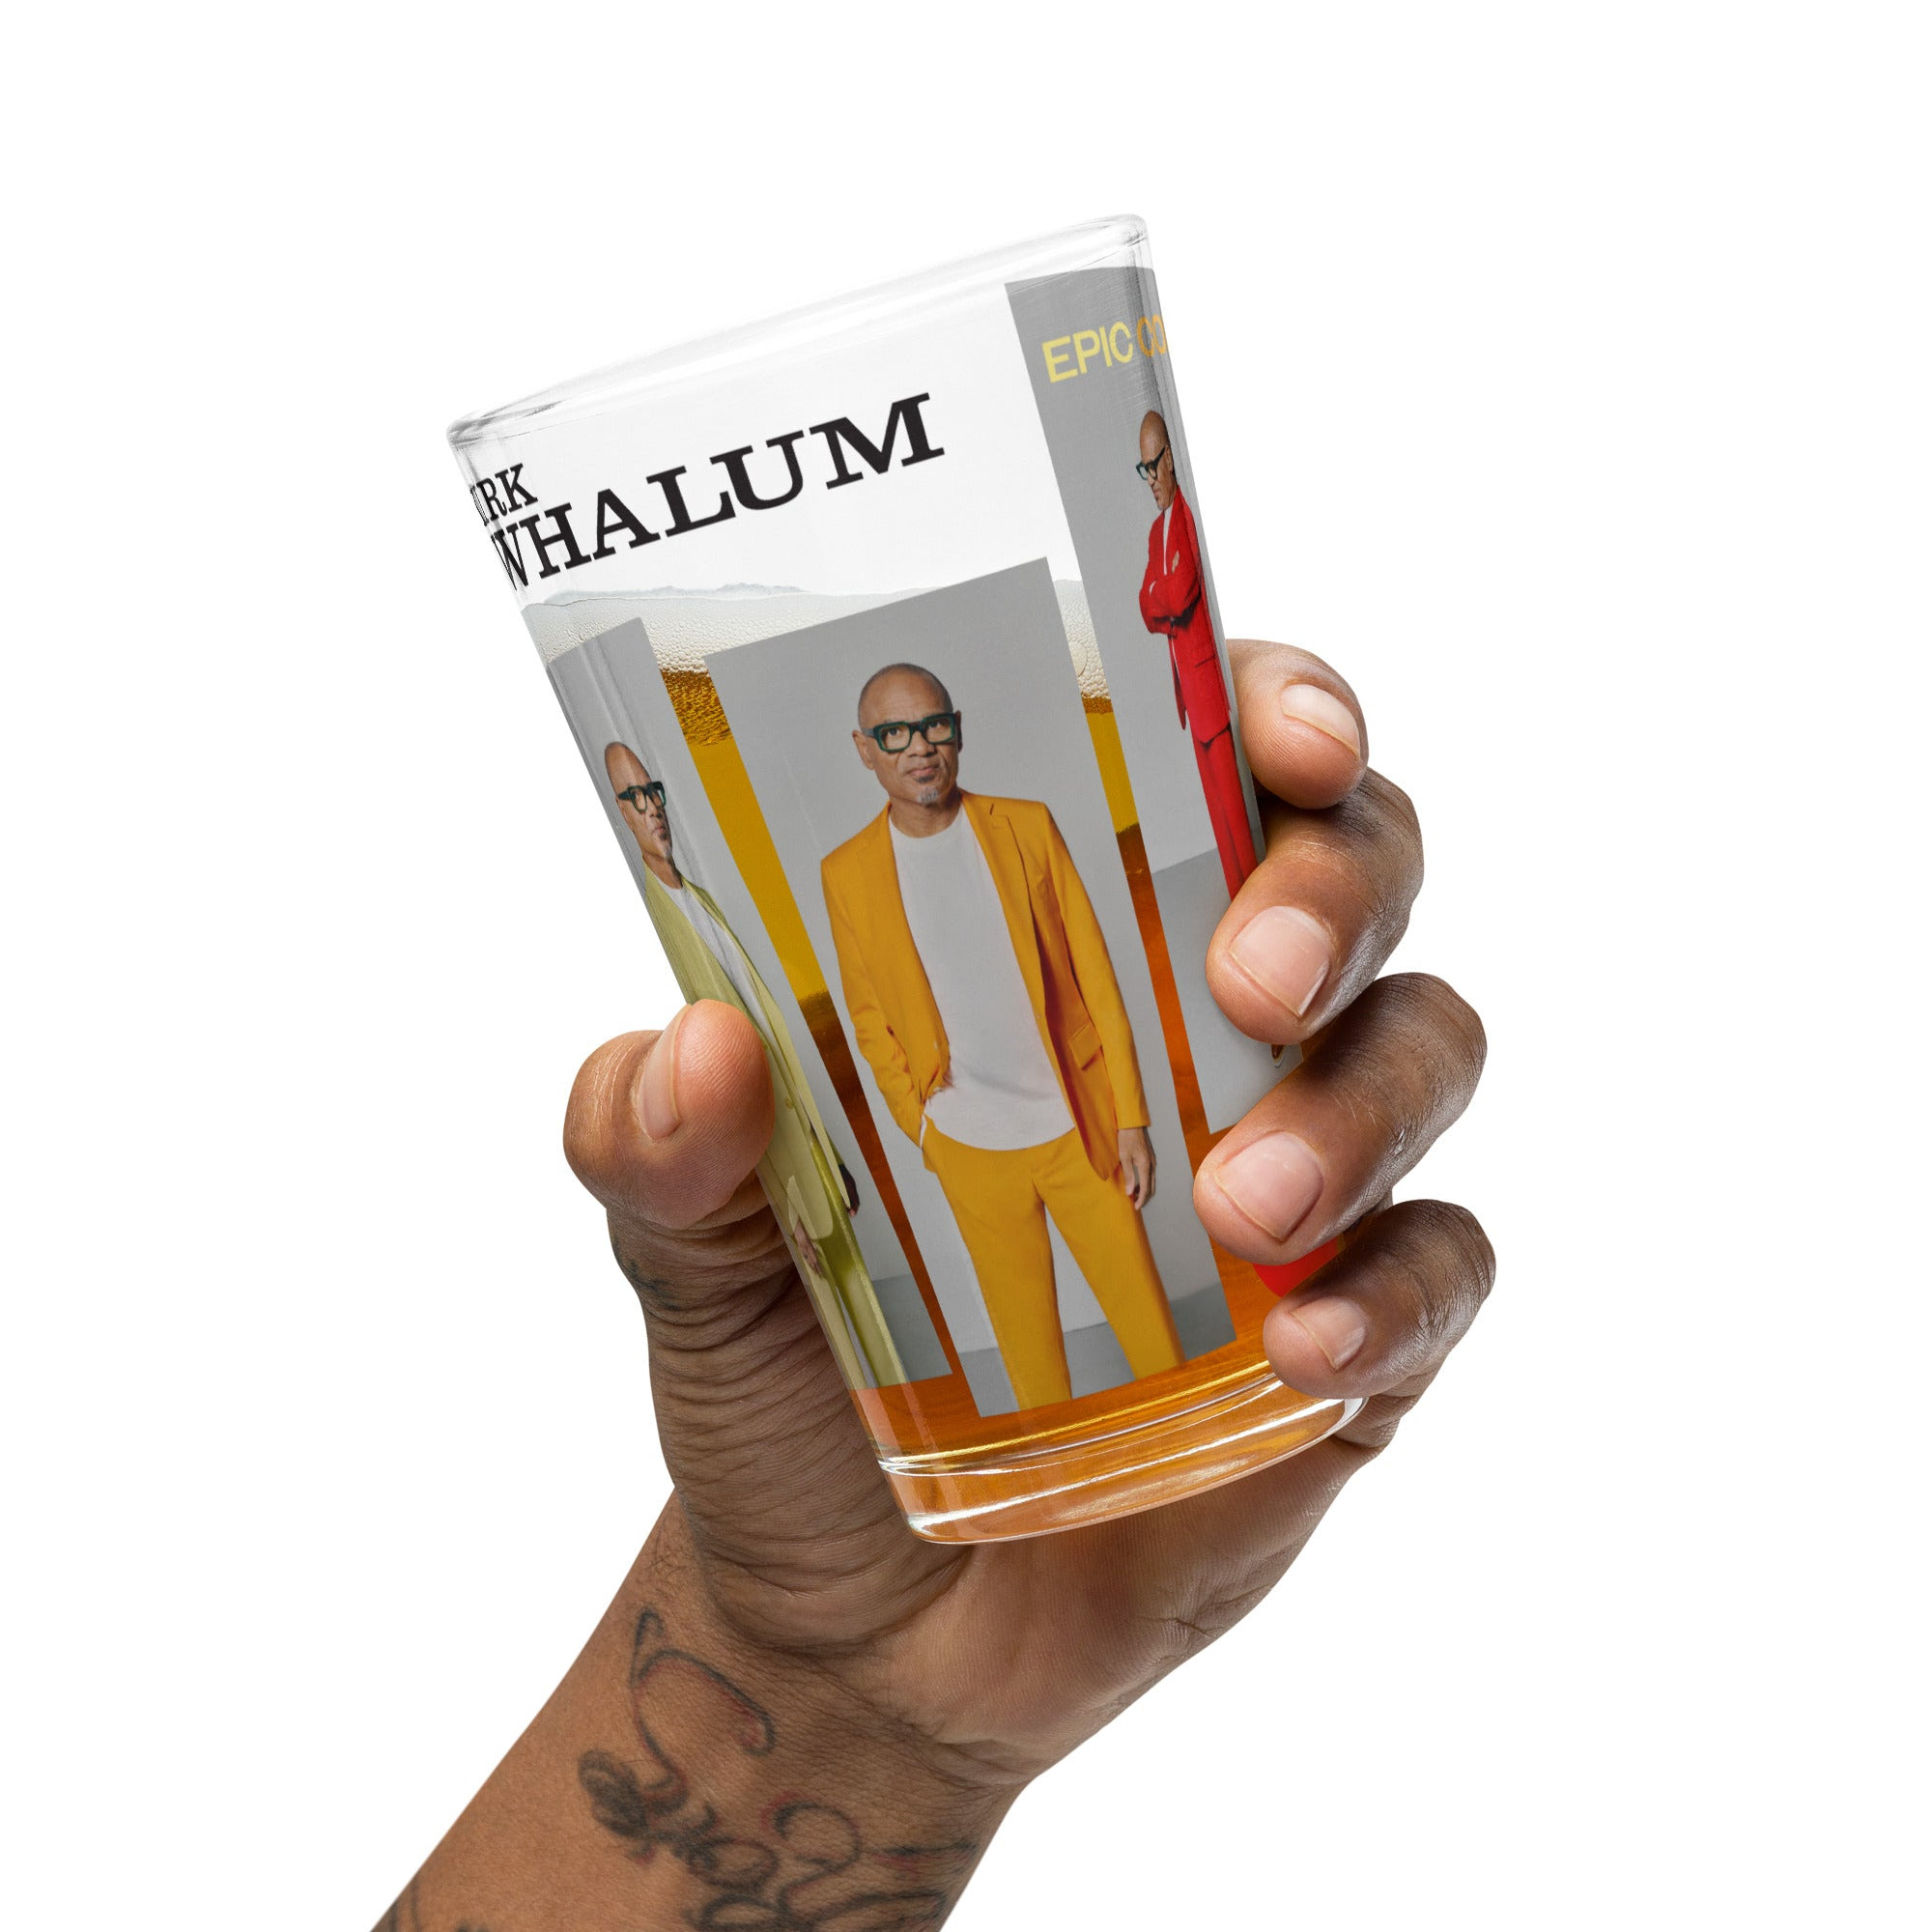 Image of Kirk Whalum - EPIC COOL COVER – PINT GLASS